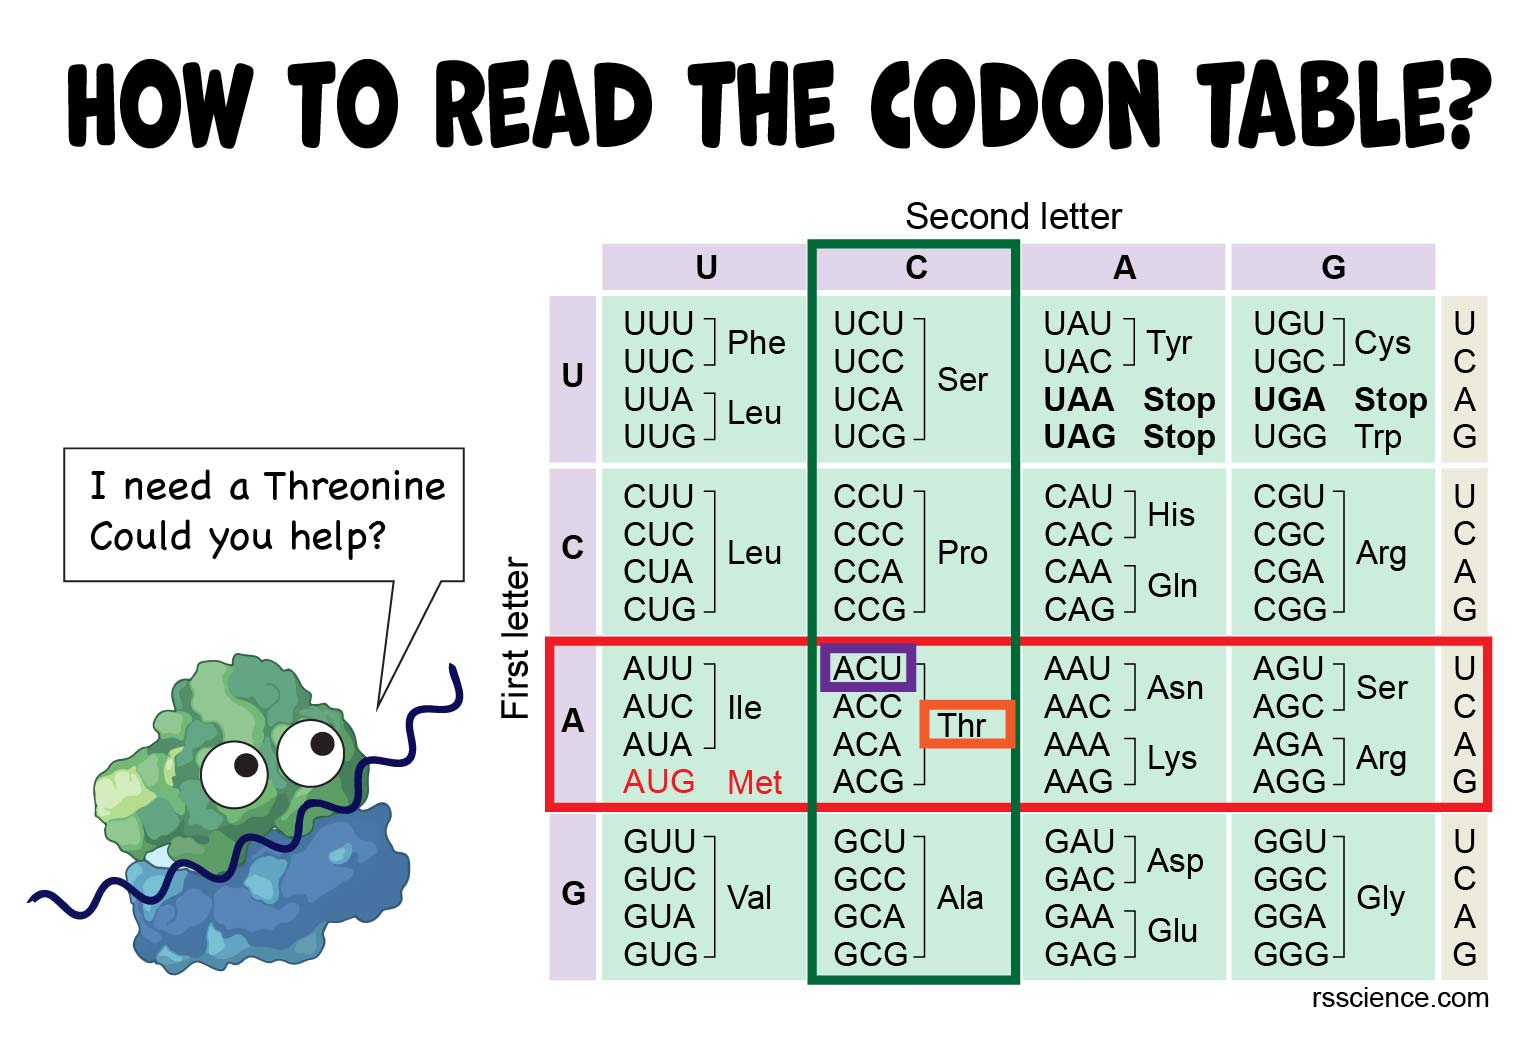 codon chart dna to mrna